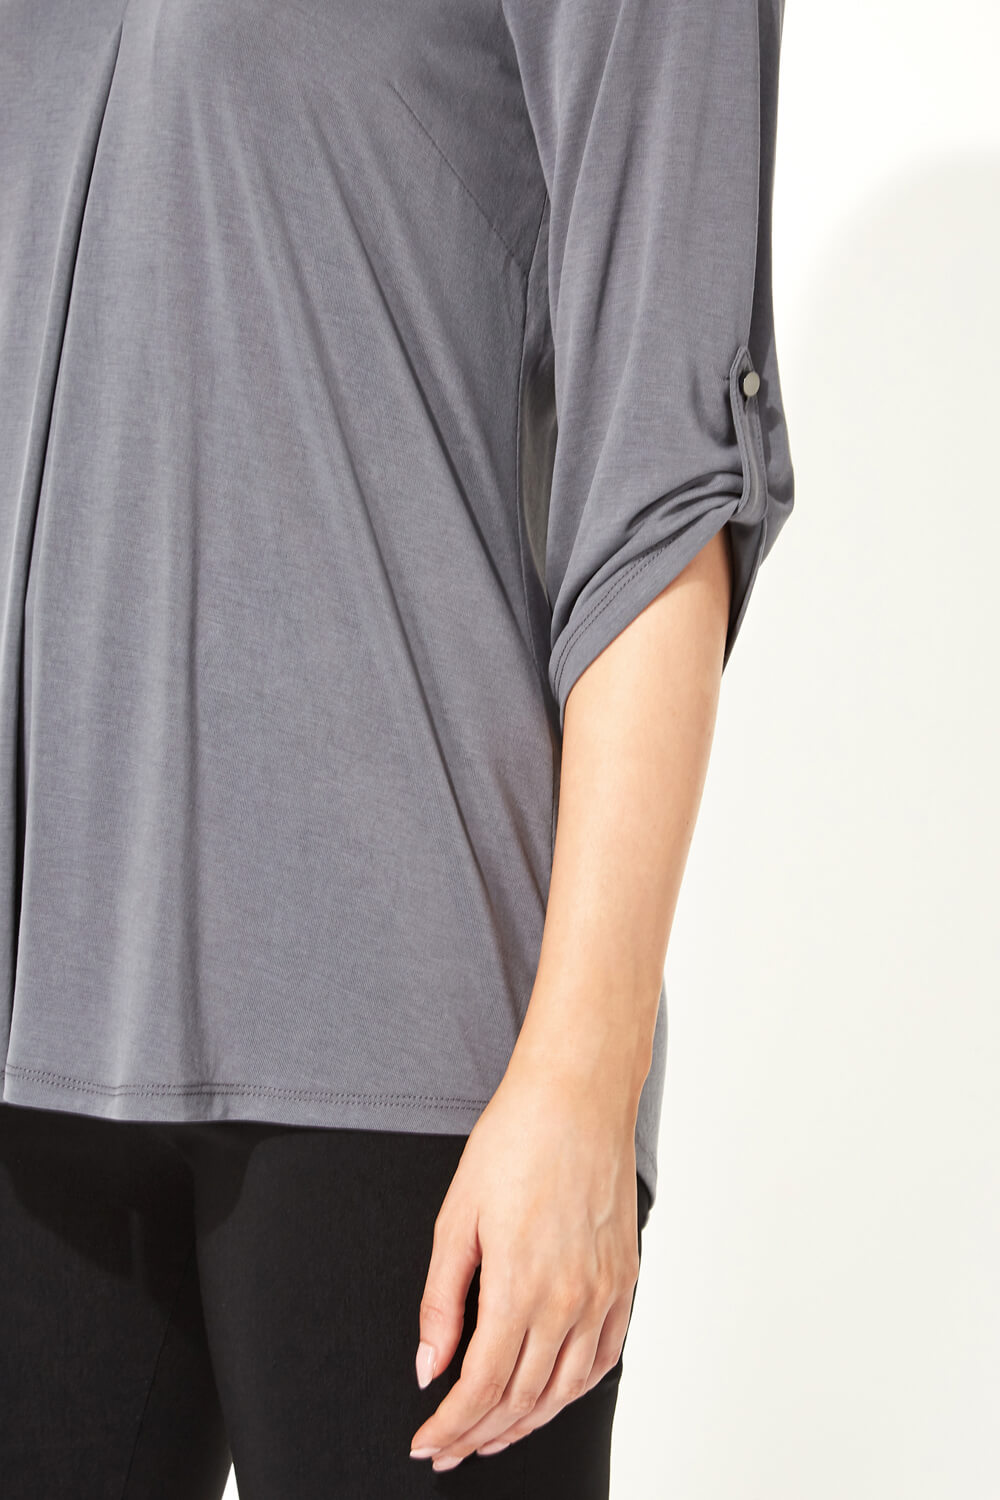 Grey Pleat Front 3/4 Sleeve Top, Image 4 of 5